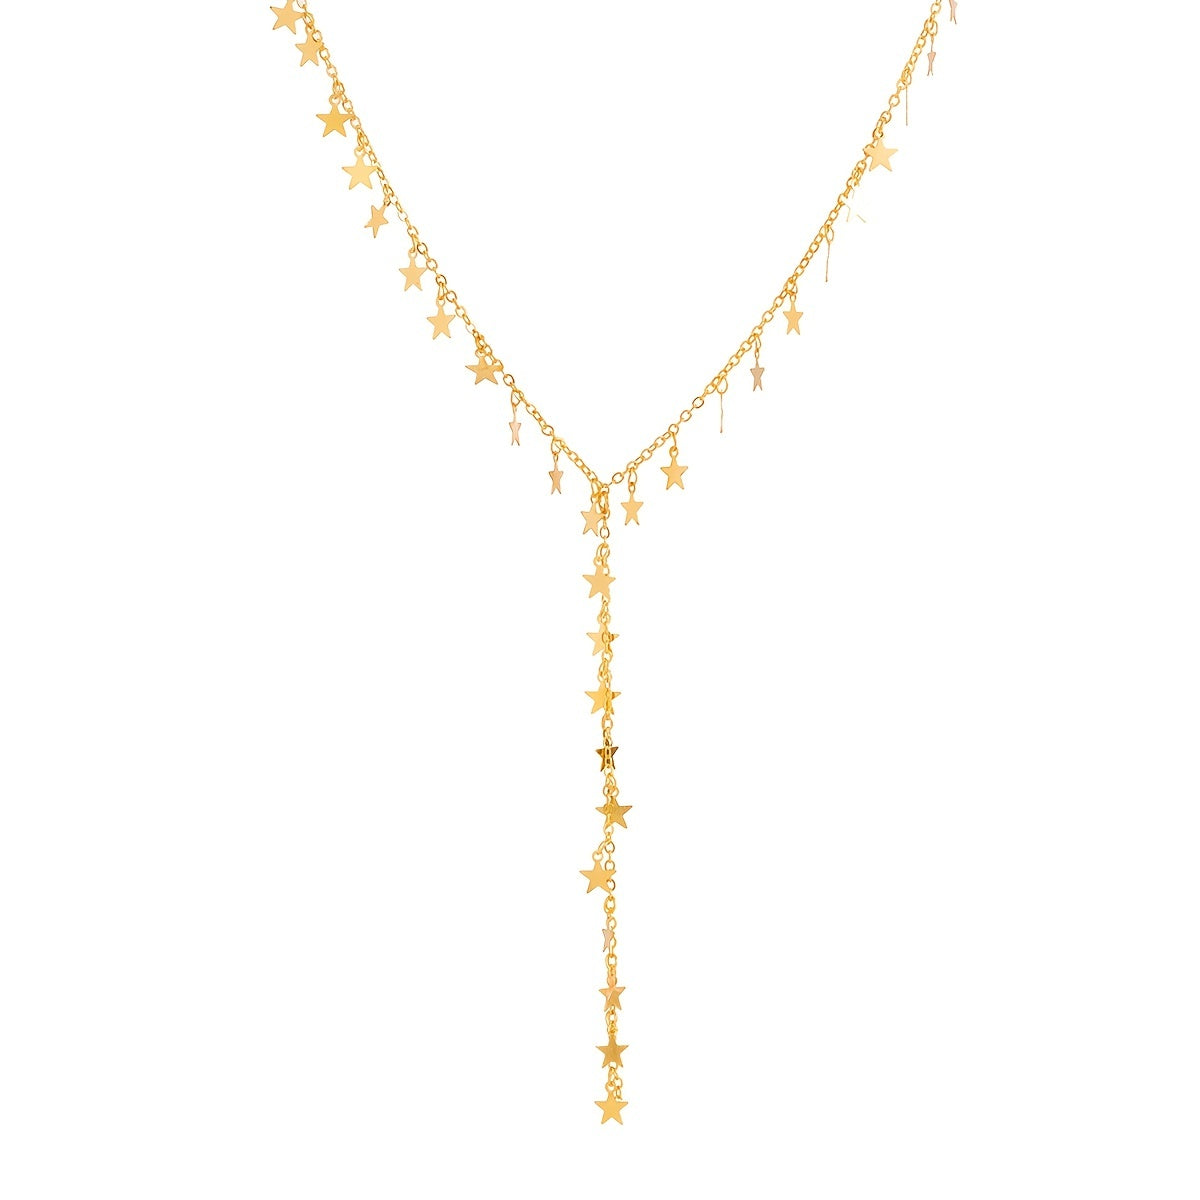 Add a Touch of Starry Glamour to Your Look with Our Y-Shaped Star Tassel Pendant Necklace - Perfect for Weddings, Proms, Festivals, and More!